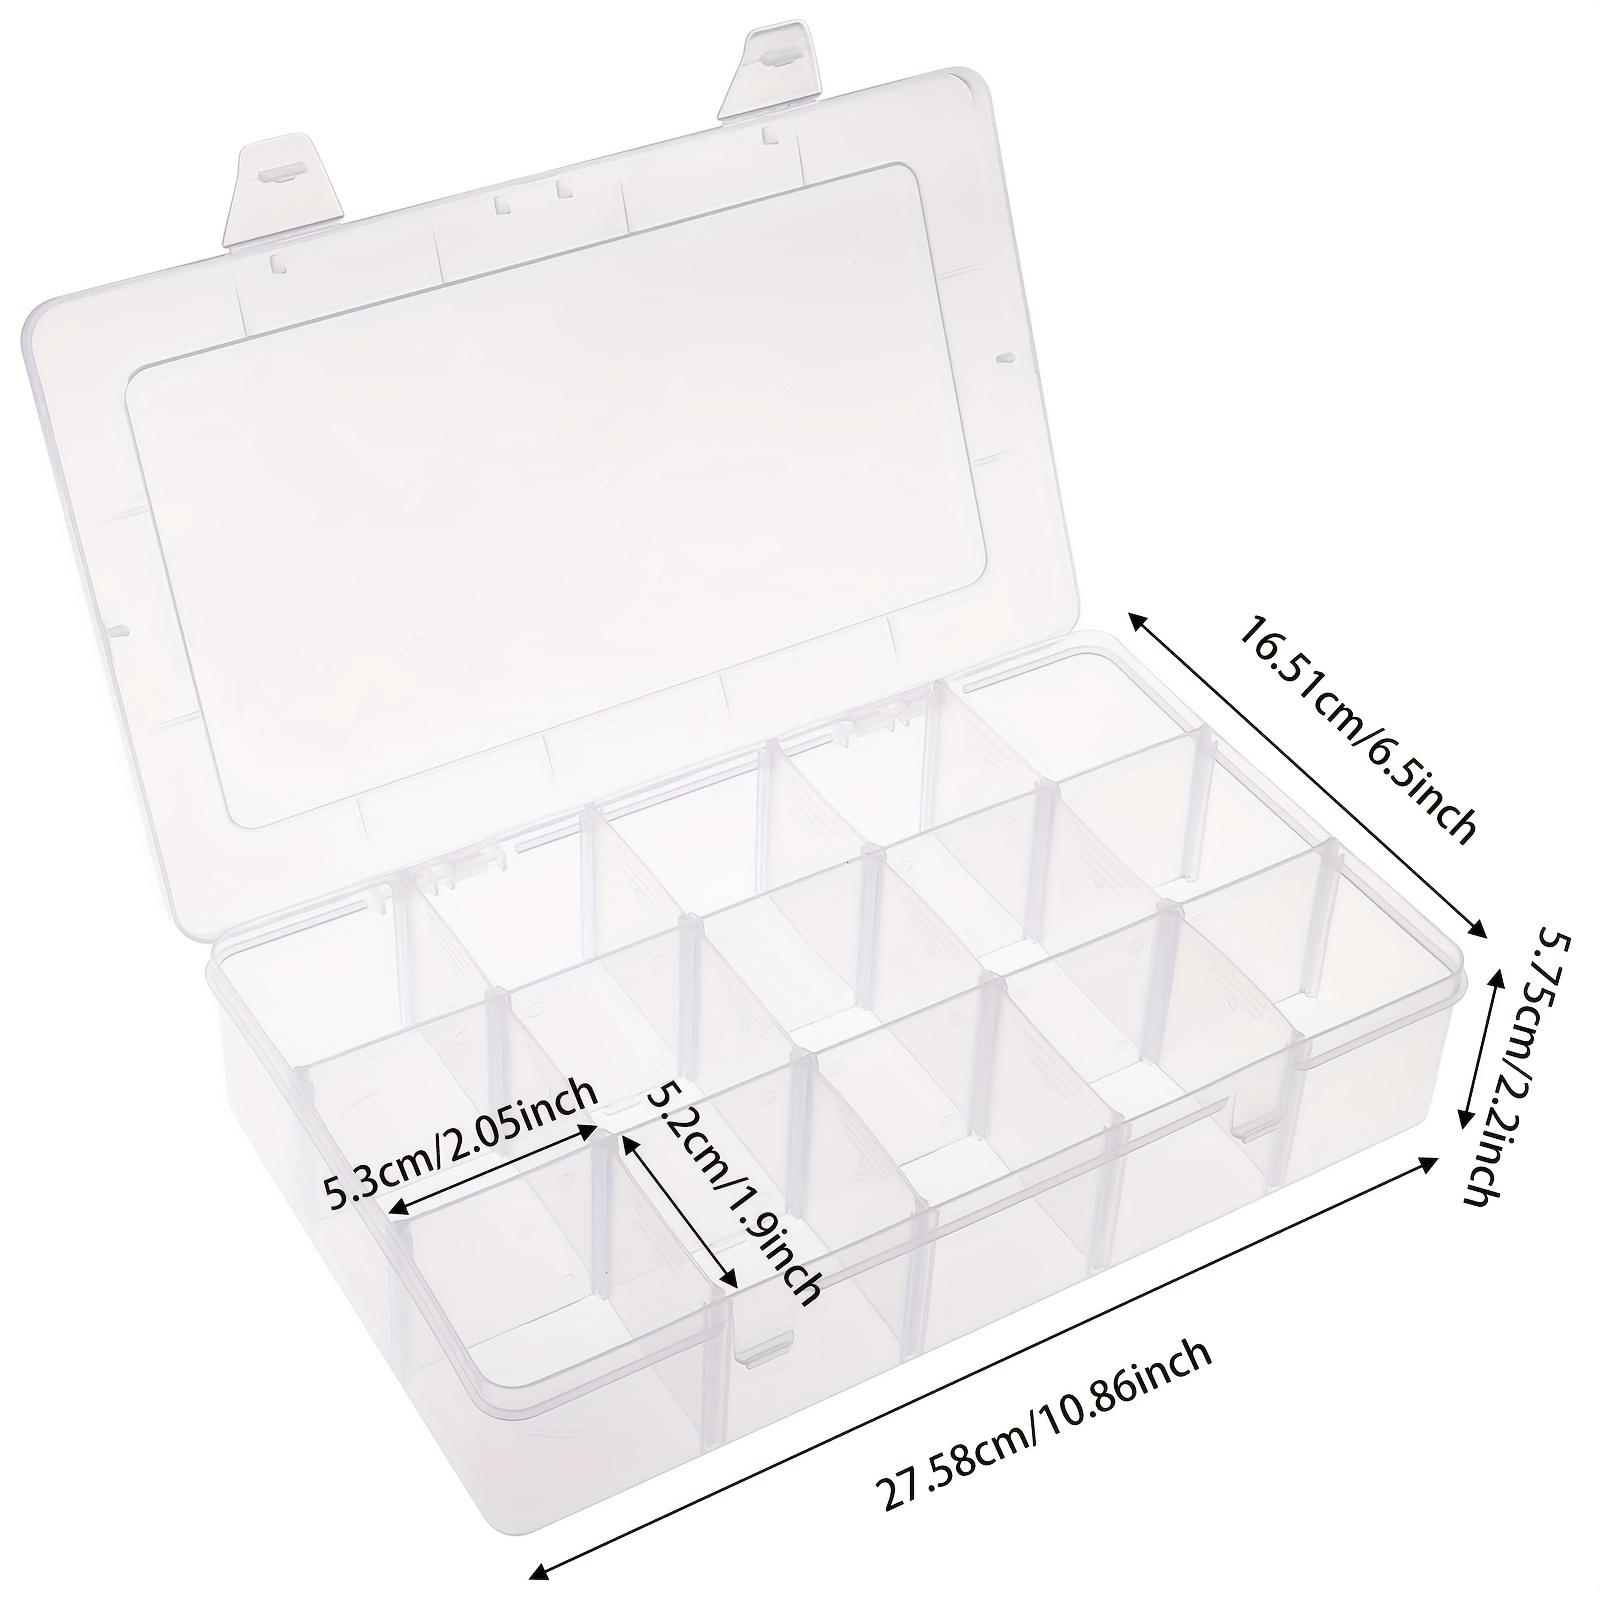 Snowkingdom Large 15 Grid Clear Organizer Box Adjustable Dividers - Plastic  Compartment Storage Container for Washi Tapes, Craft, Beads, Jewelry, Small  Parts